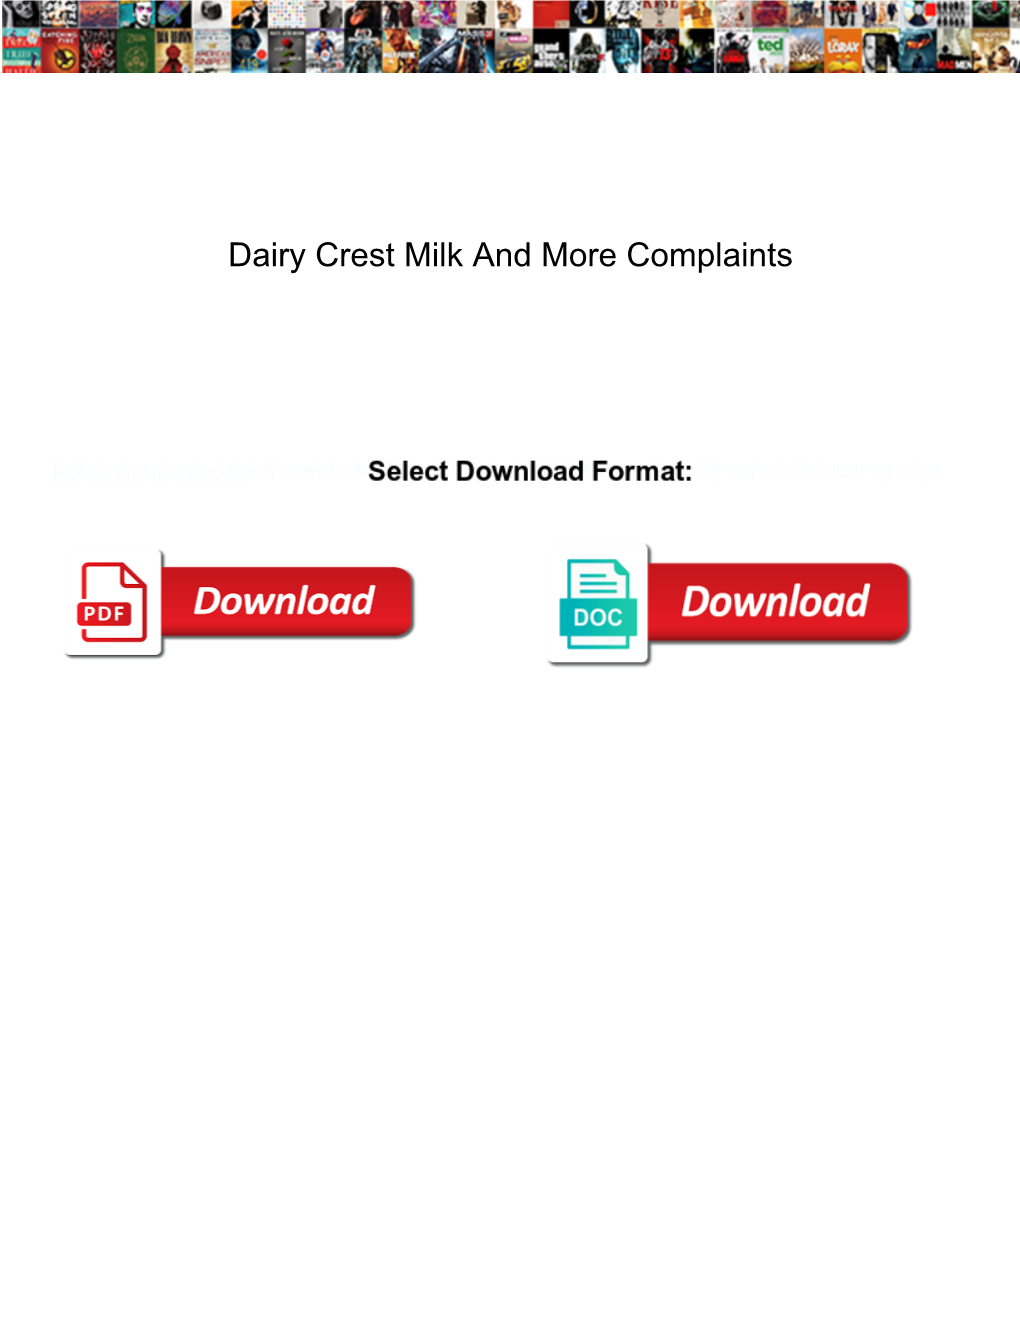 Dairy Crest Milk and More Complaints